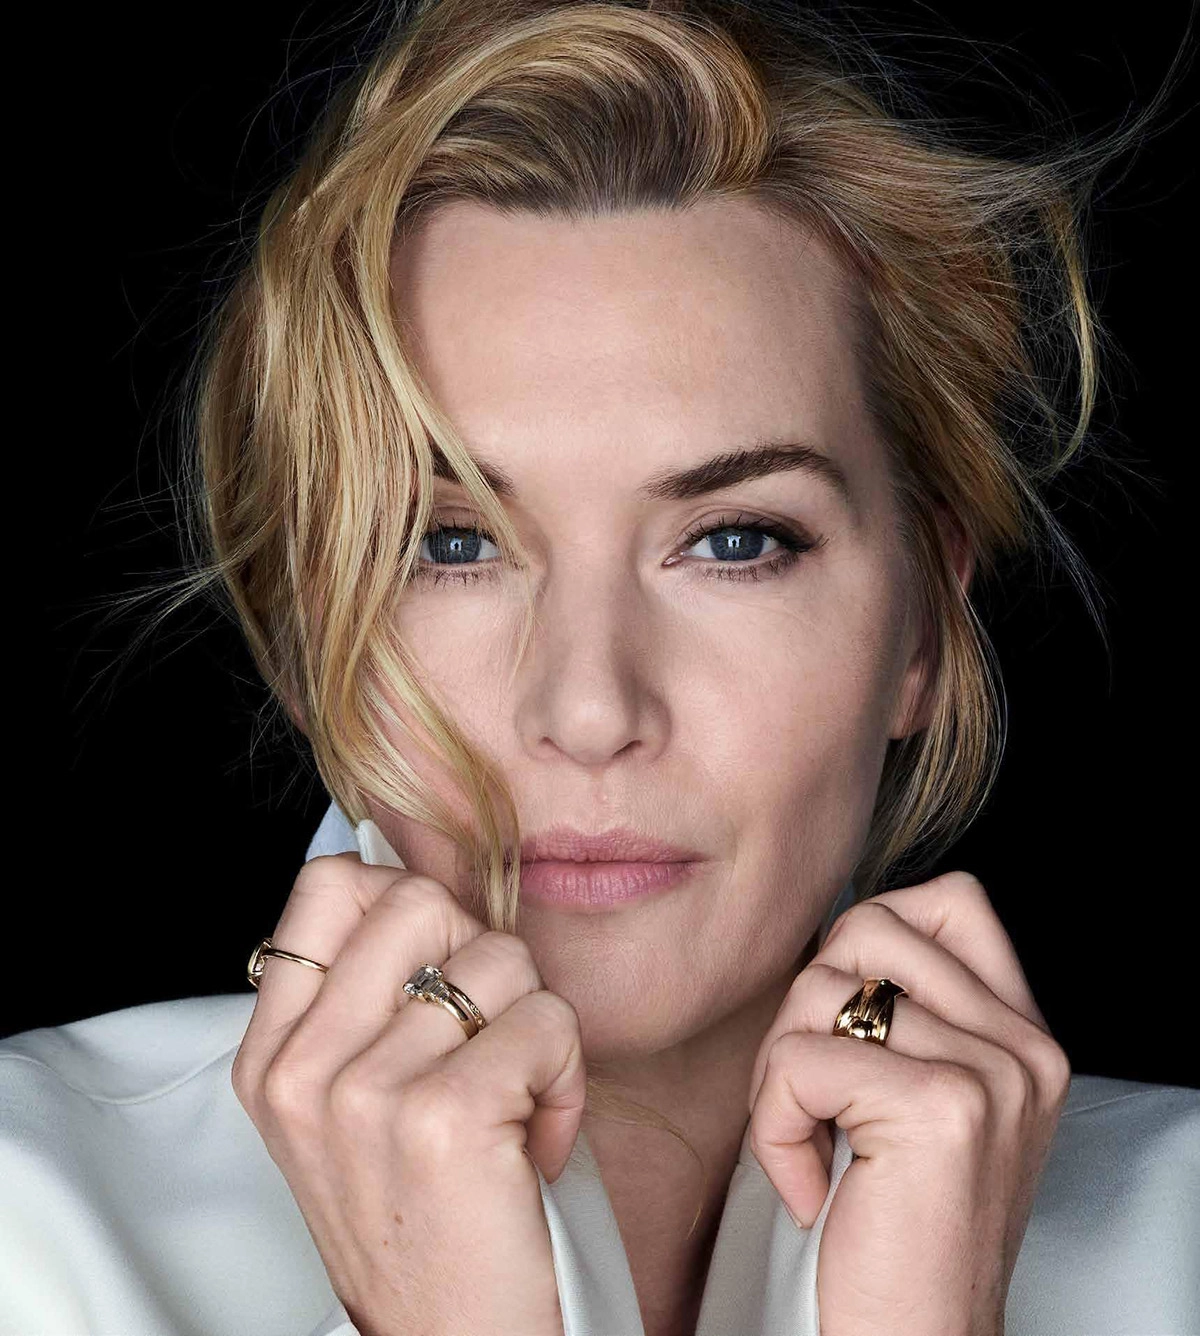 Kate Winslet covers Madame Figaro October 21st, 2022 by Jason Bell